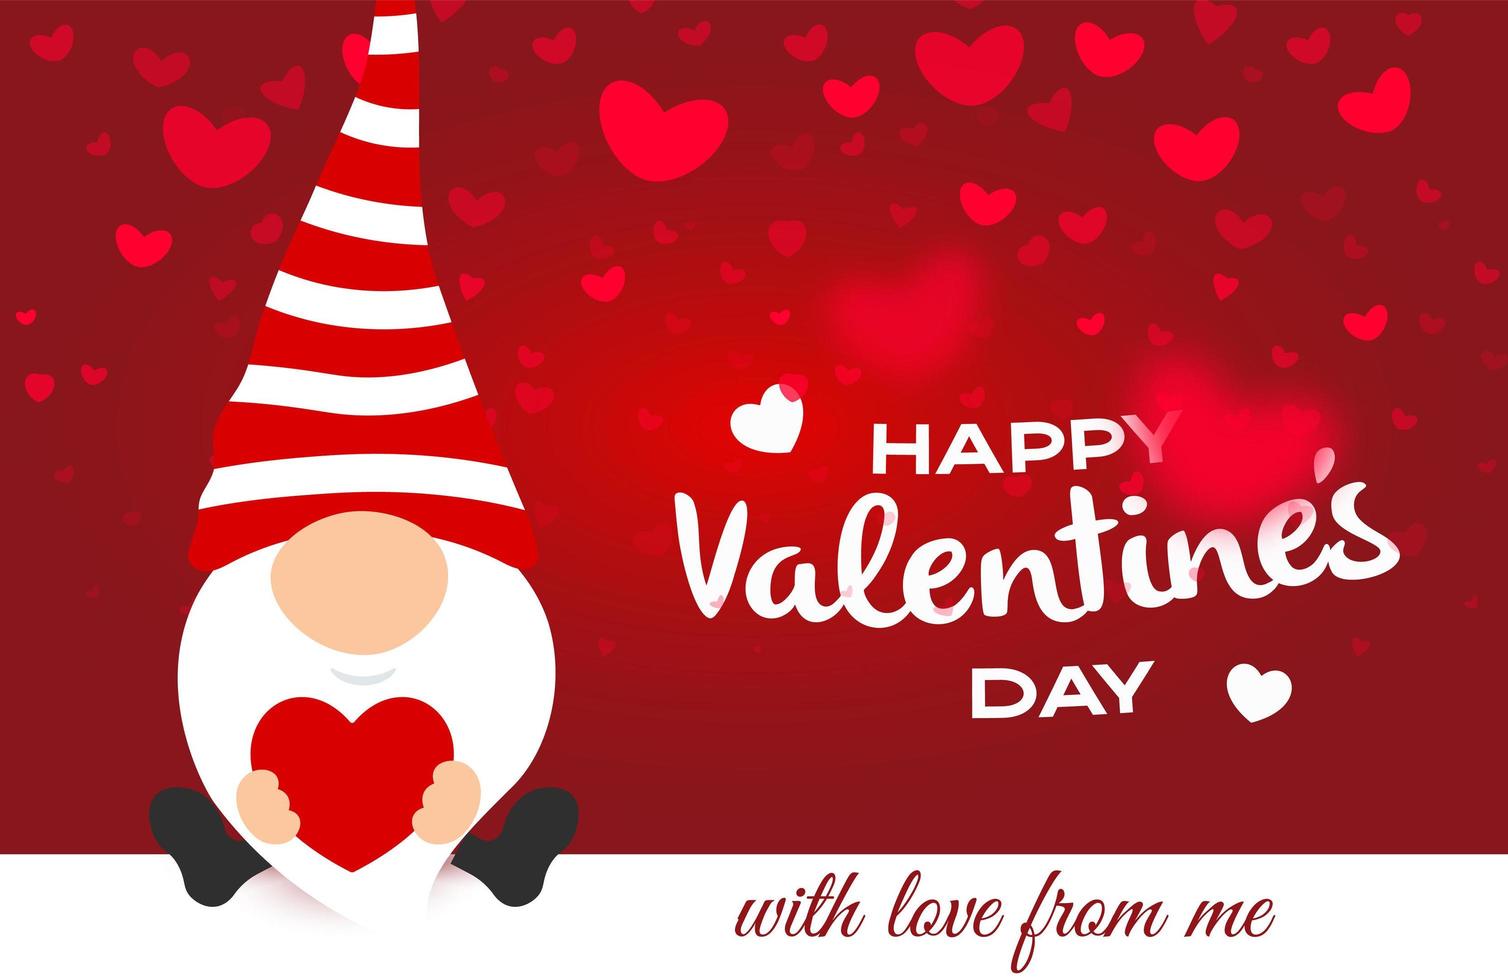 Valentine day greeting card. Cartoon cute gnome with red heart. Falling hearts on background. Vector illustration